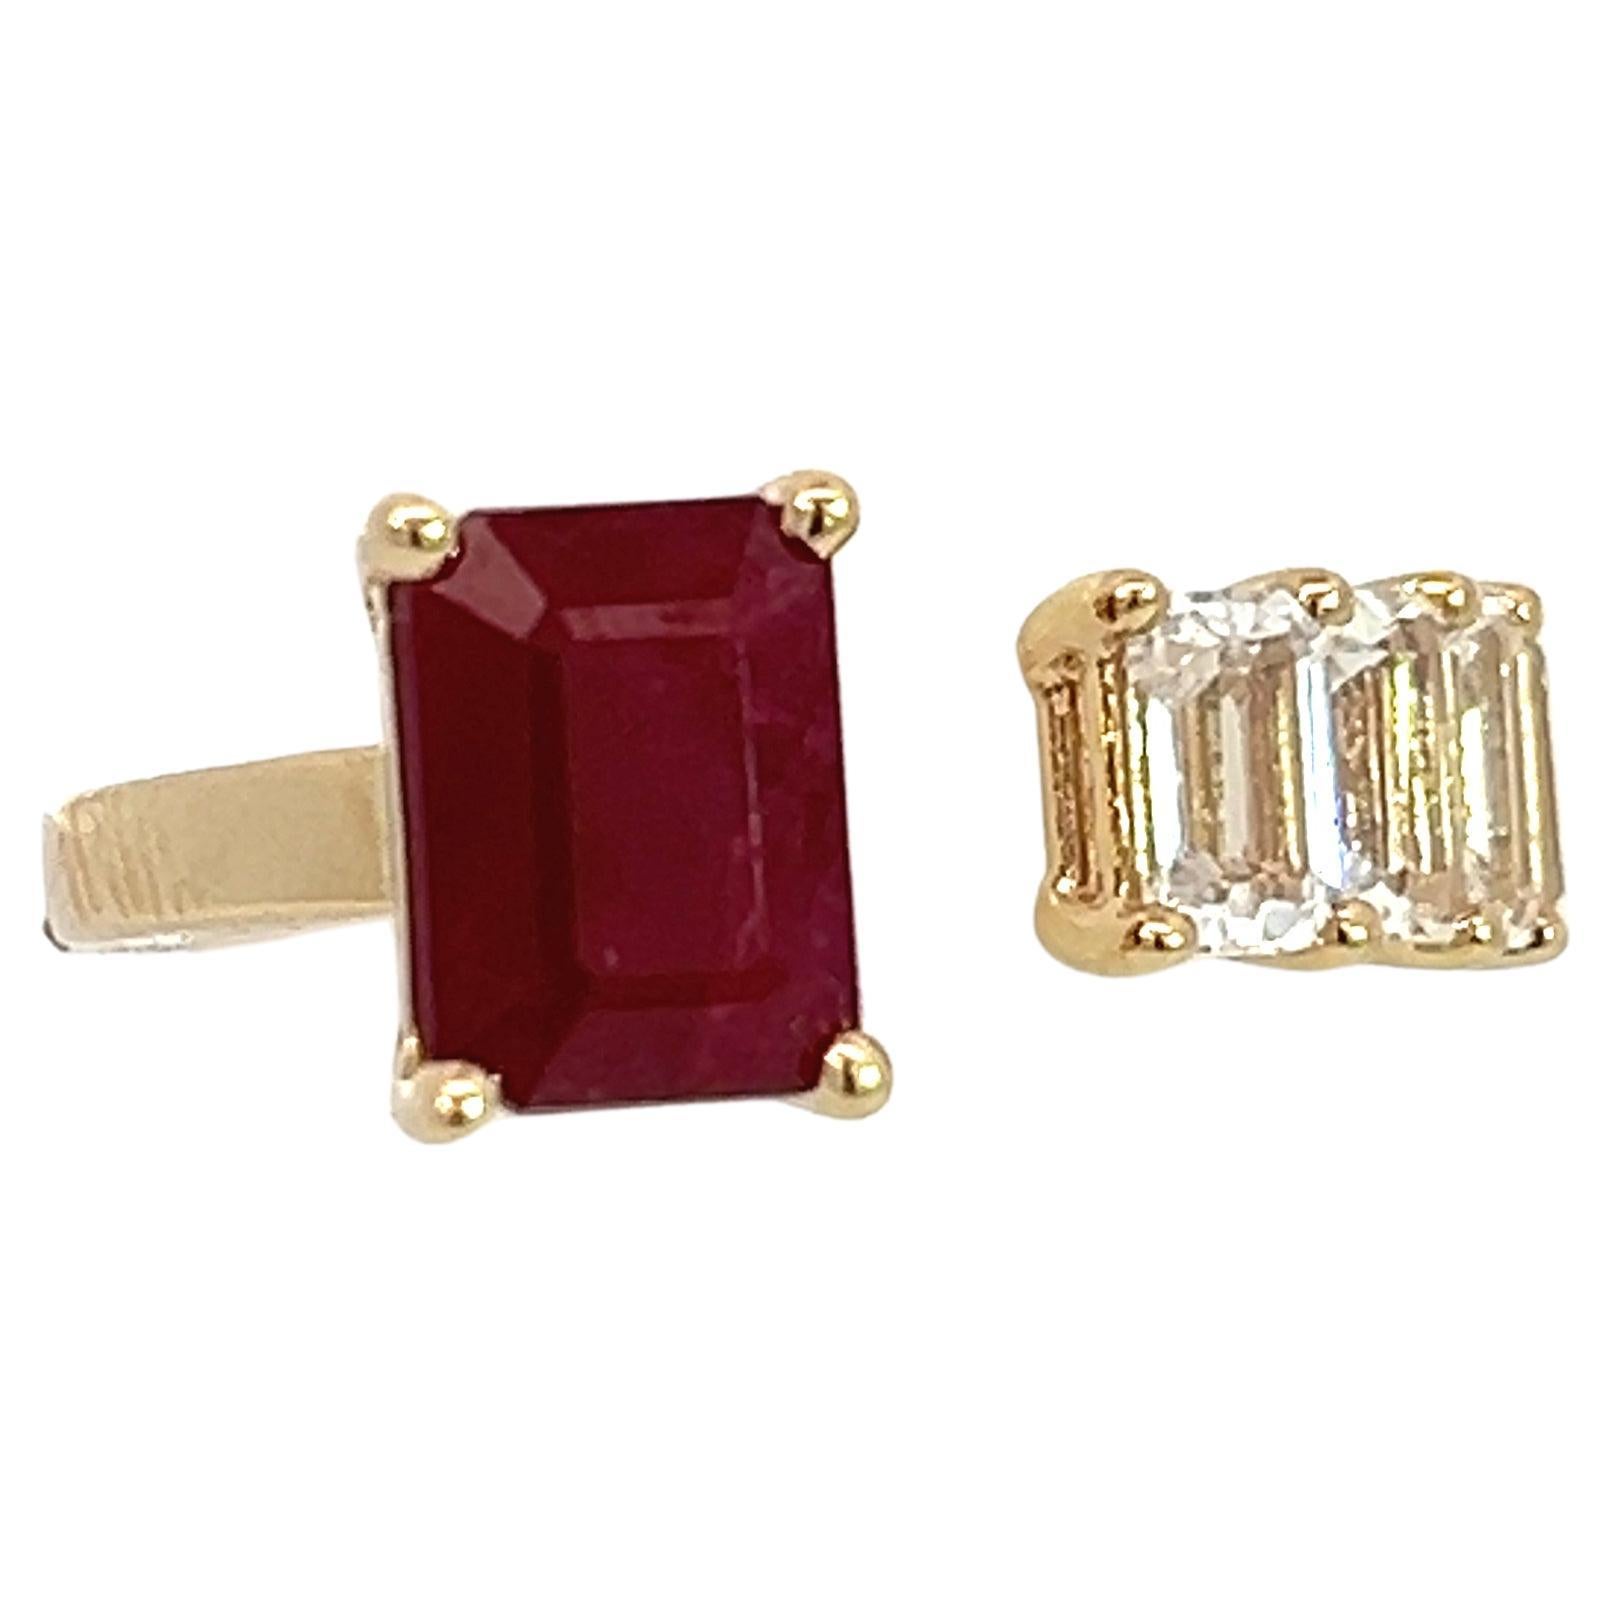 Natural Ruby Sapphire Ring 6.5 14k W Gold 3.64 TCW Certified For Sale